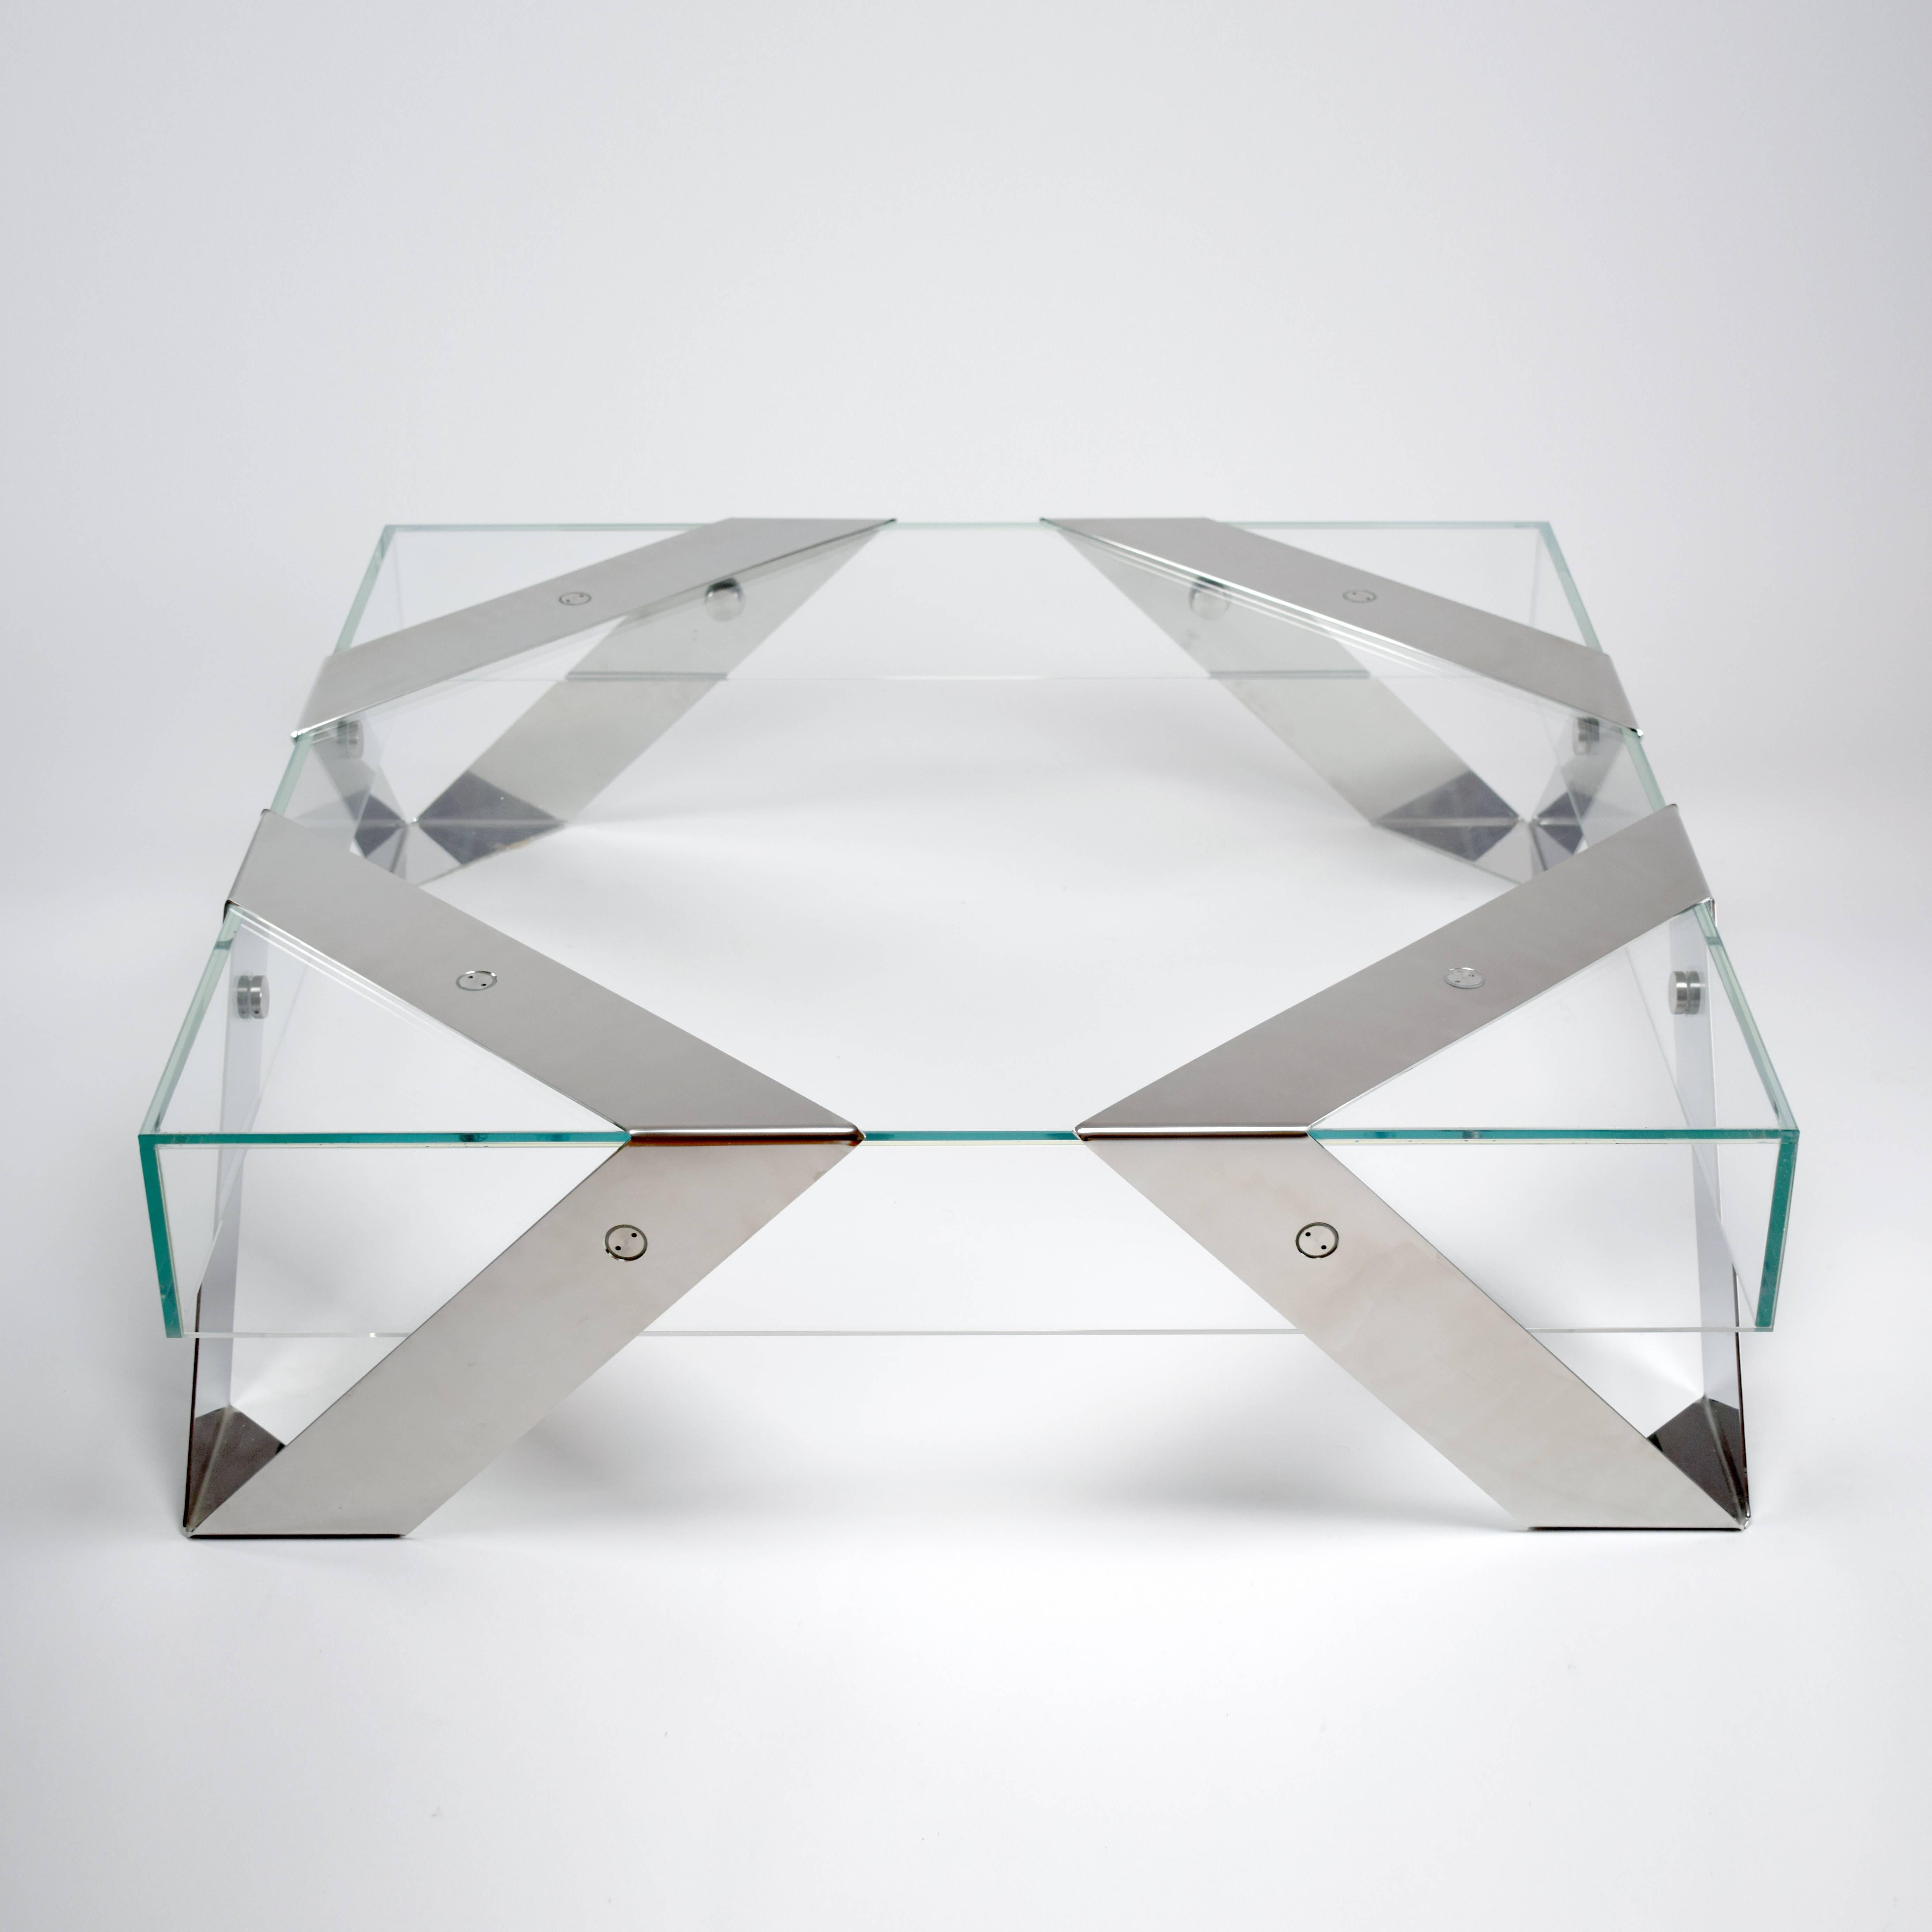 Gift Wrap 2 Tempered Super Clear Glass Coffee Table with White Lacquered Steel In New Condition For Sale In Union City, NJ